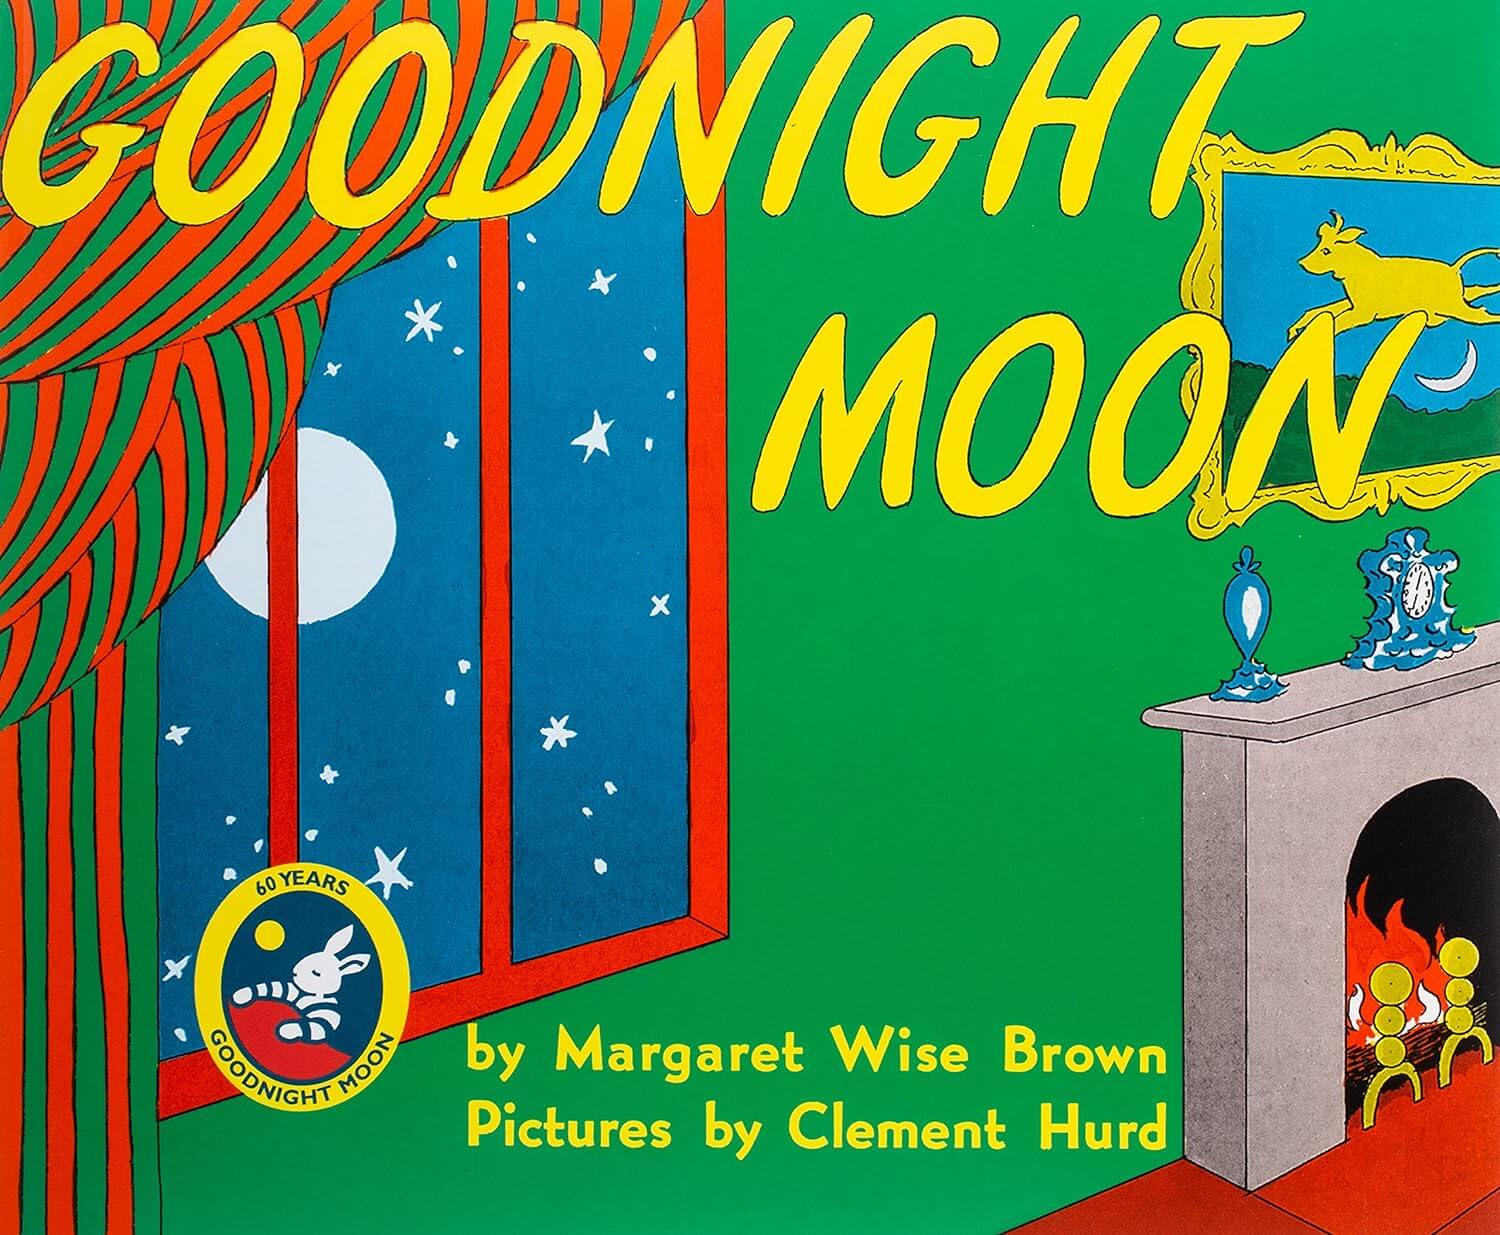 "Goodnight Moon" by Margaret Wise Brown